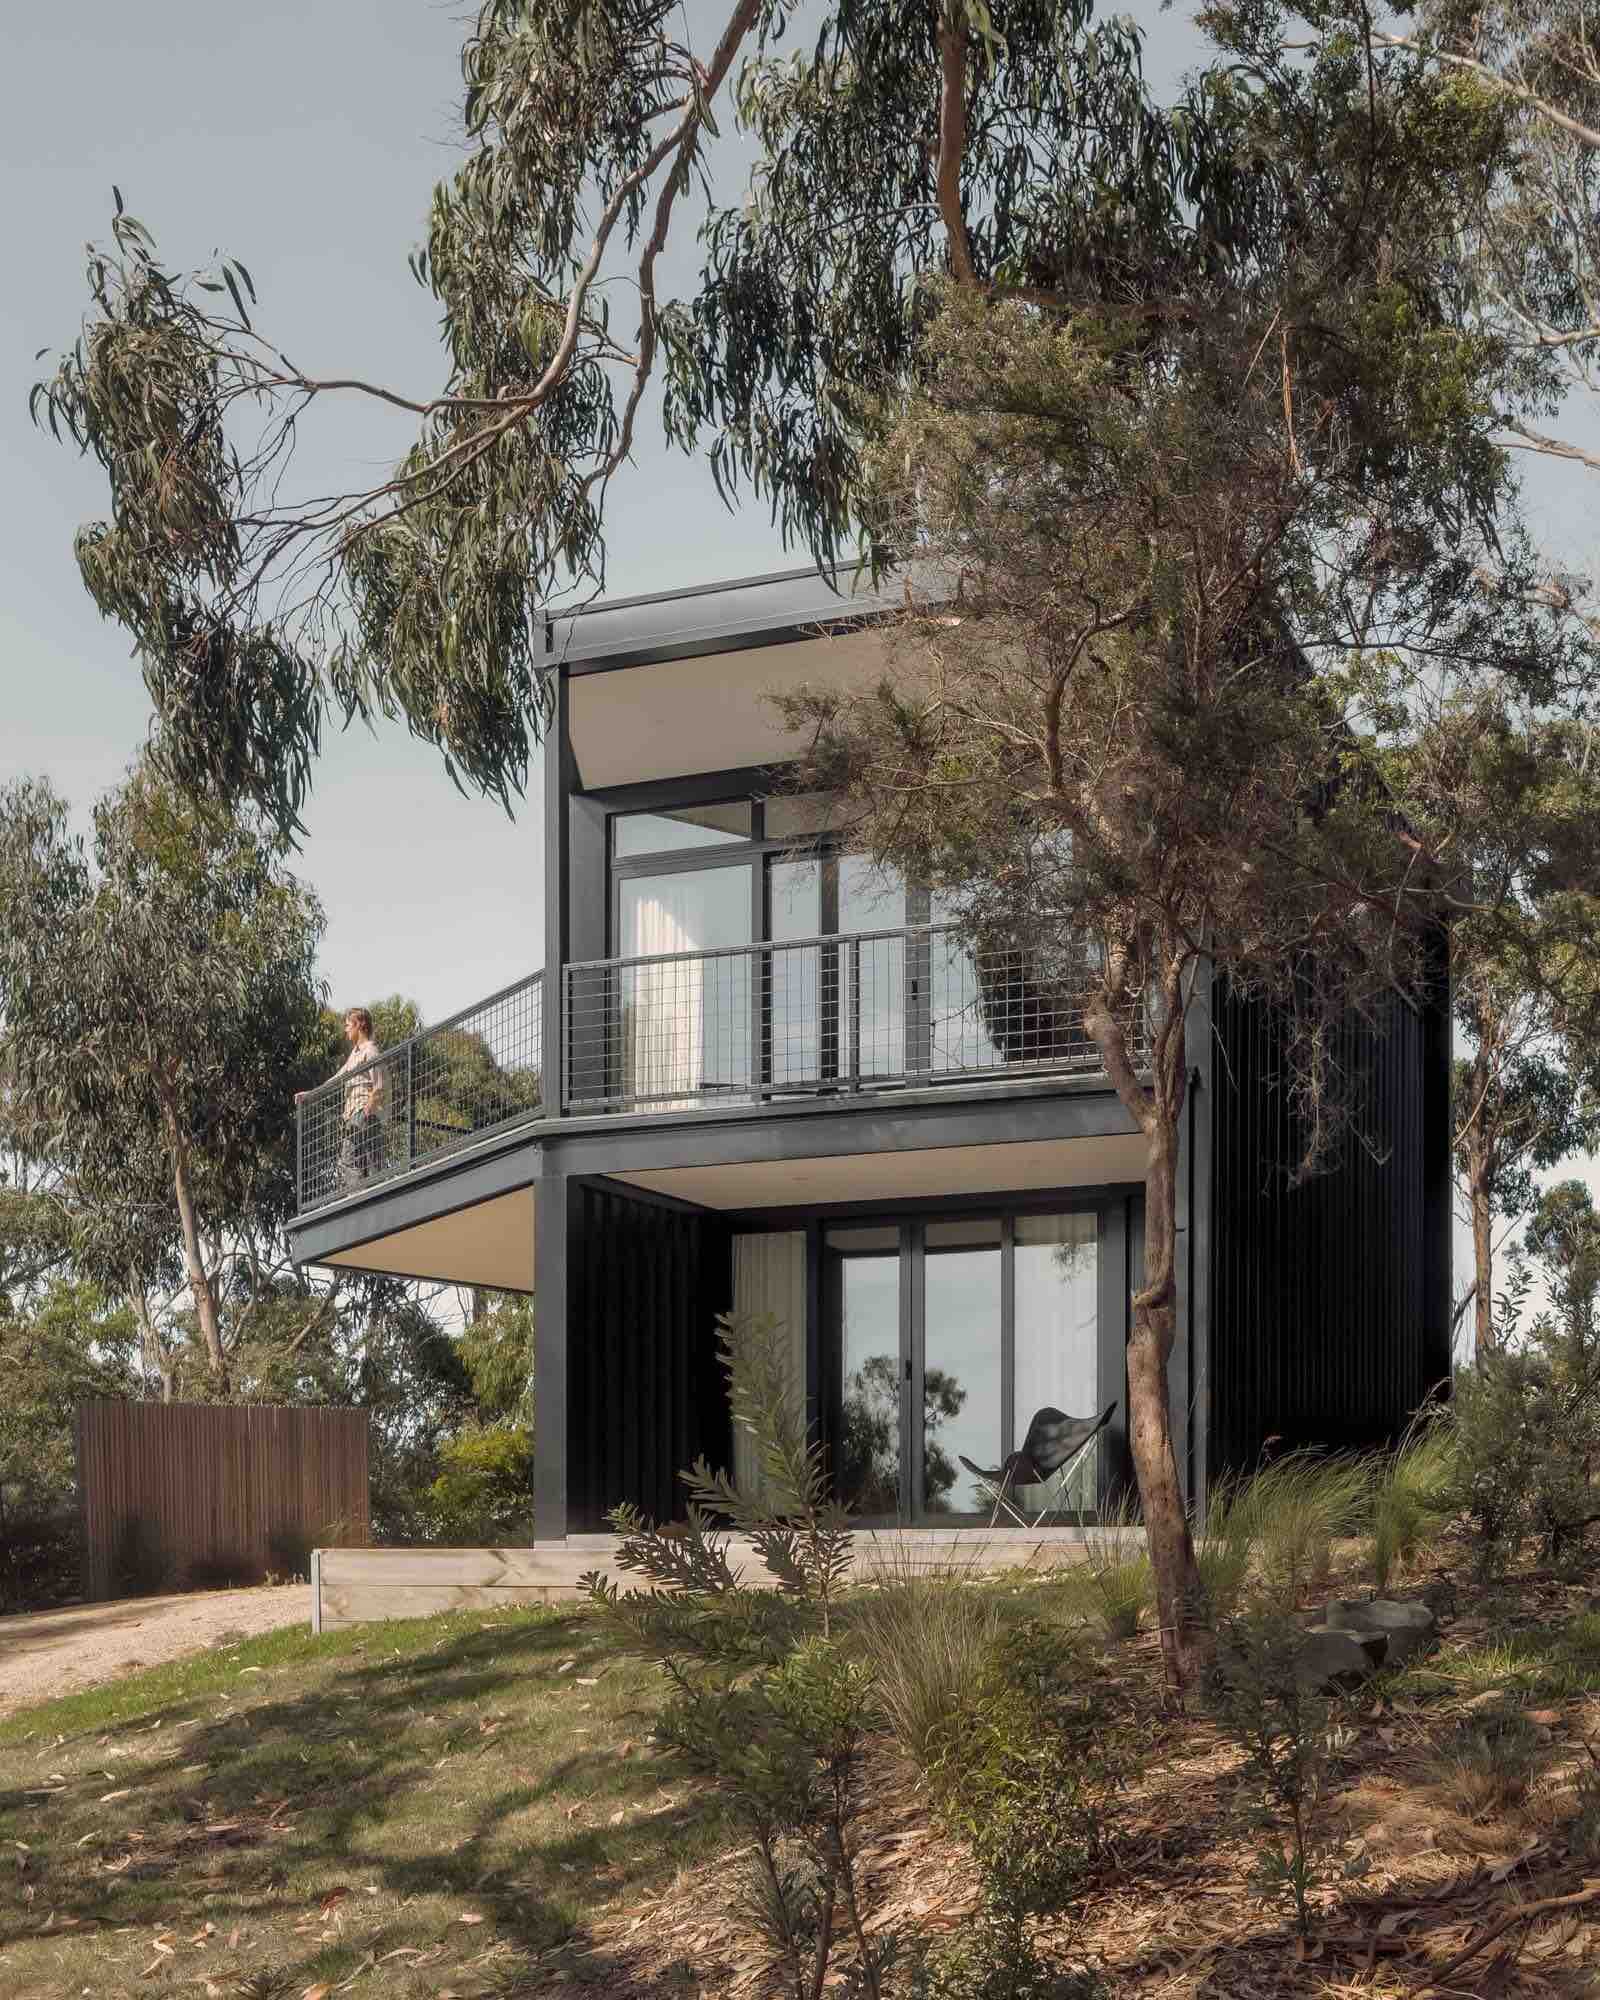 Kennett River House by MGAO showing external facade with person standing on deck